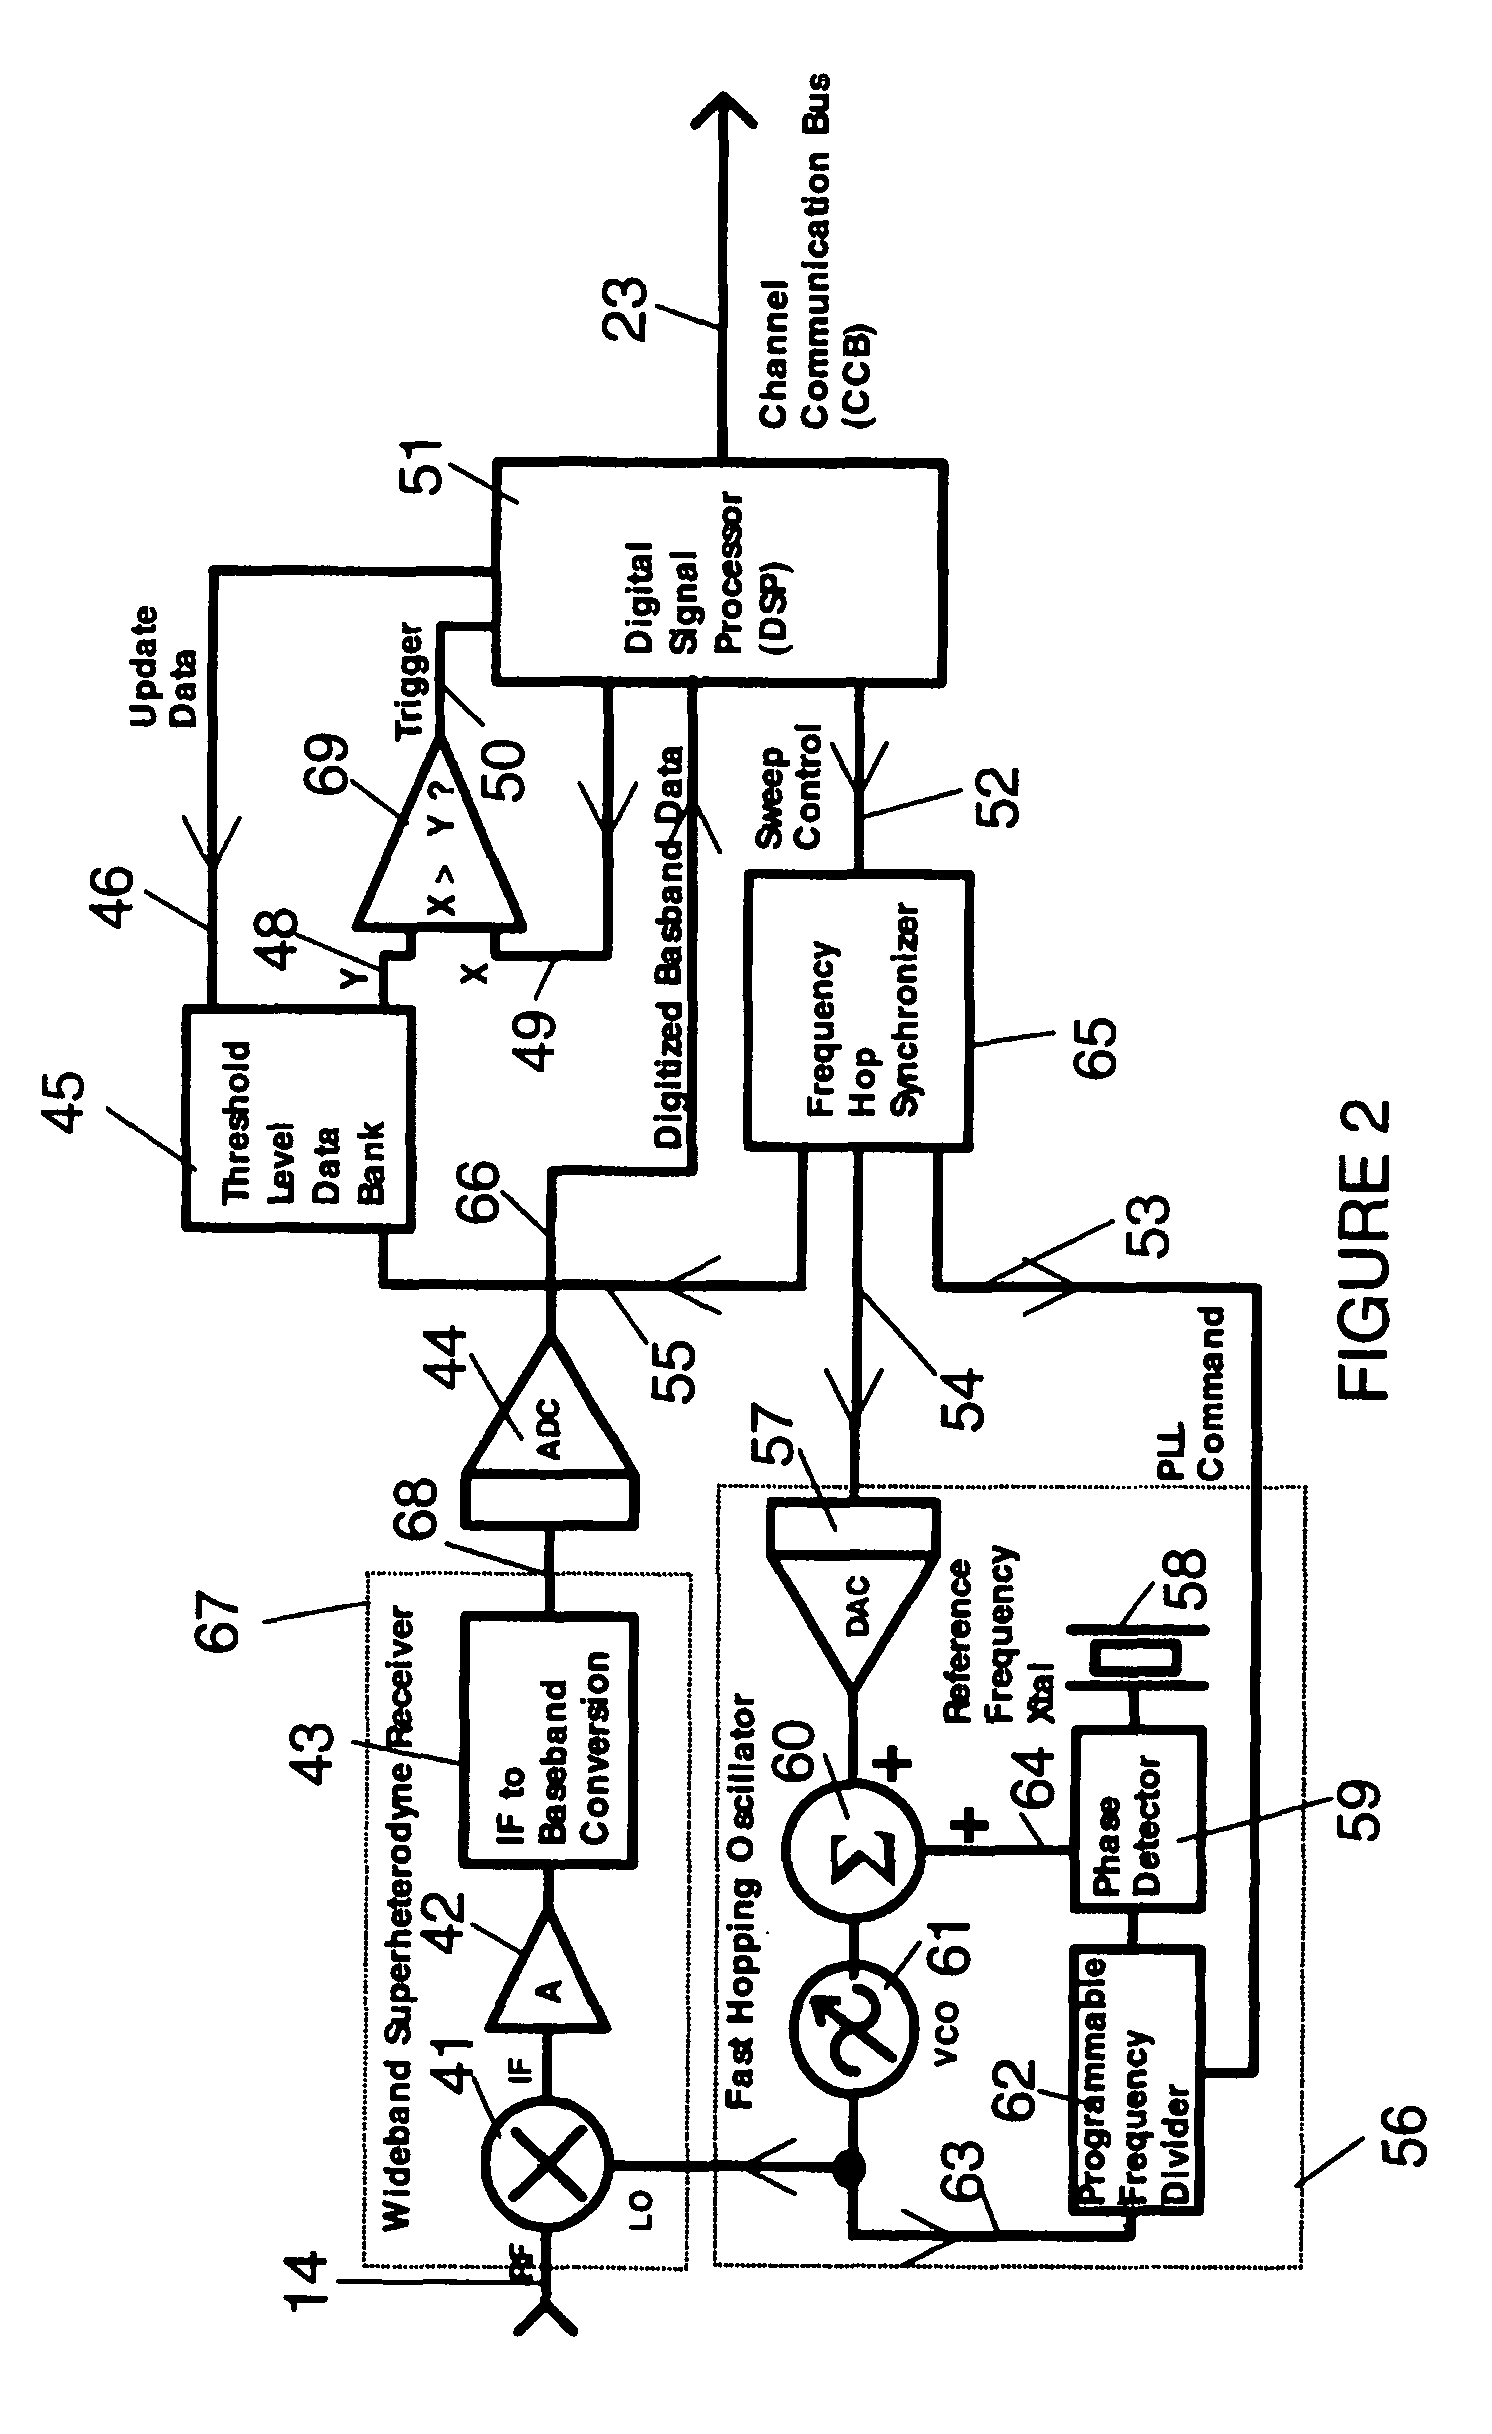 Reactive parallel processing jamming system